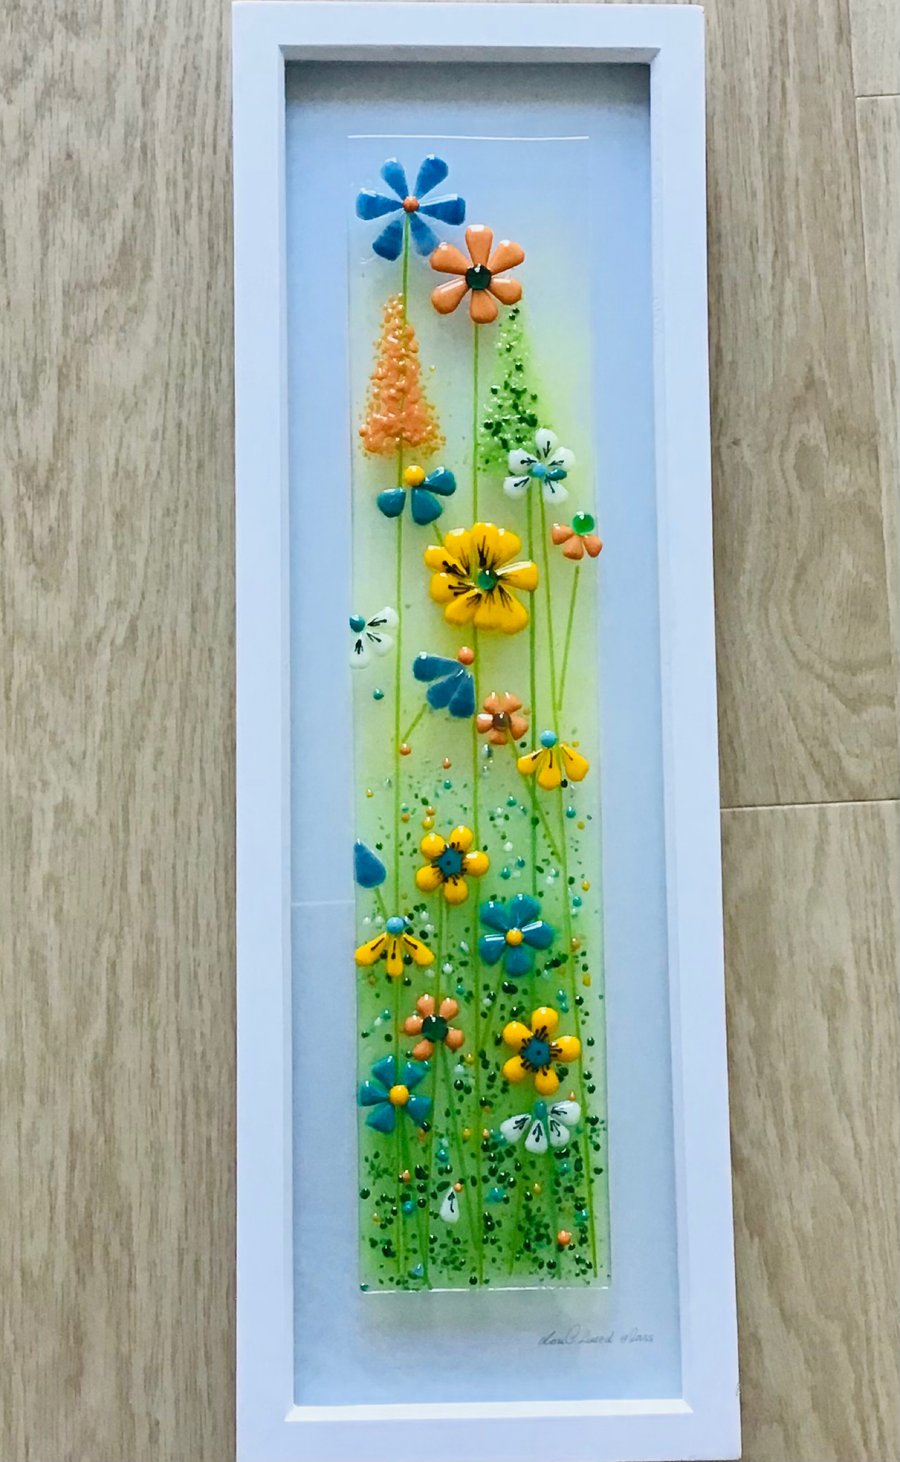  ‘Summer’ Fused glass floral art picture